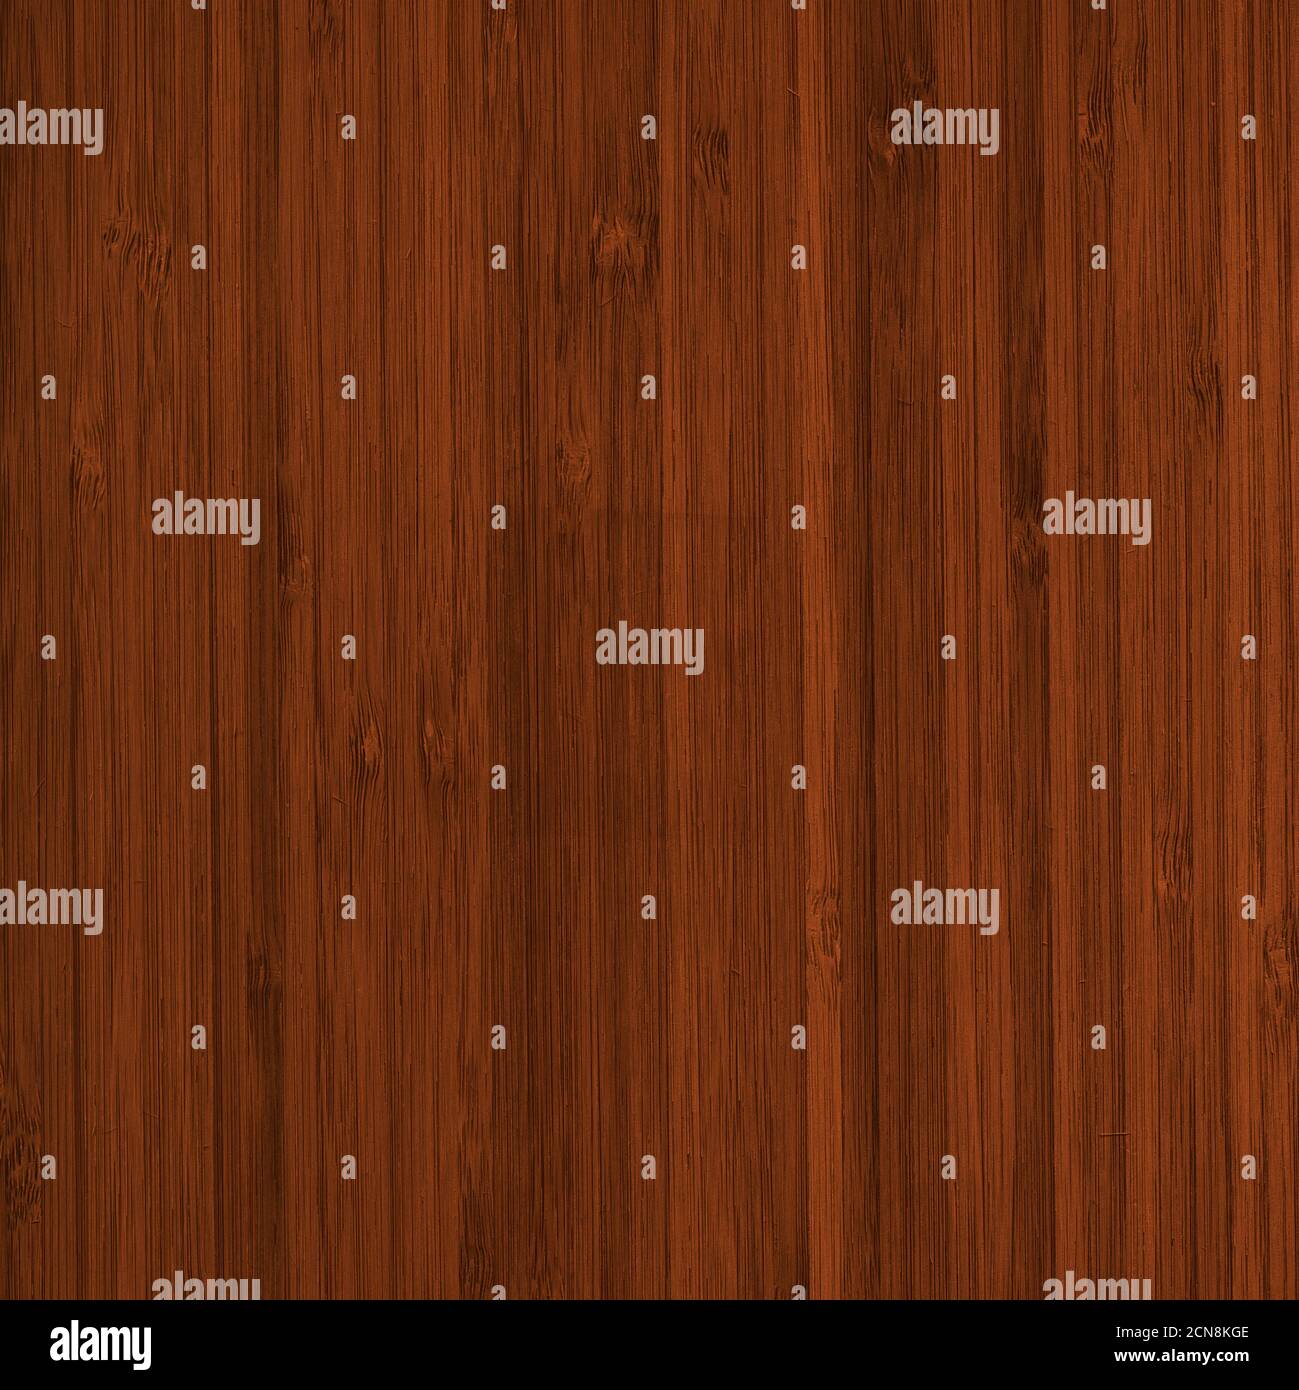 8×118 Inches Teak Wood Wallpaper Peel and Stick Wood Grain Contact Paper  Self Adhesive Wood Texture Vinyl Wrap Waterproof Removable for Furniture  Cabinets Table Wall Covering Countertops - Walmart.com